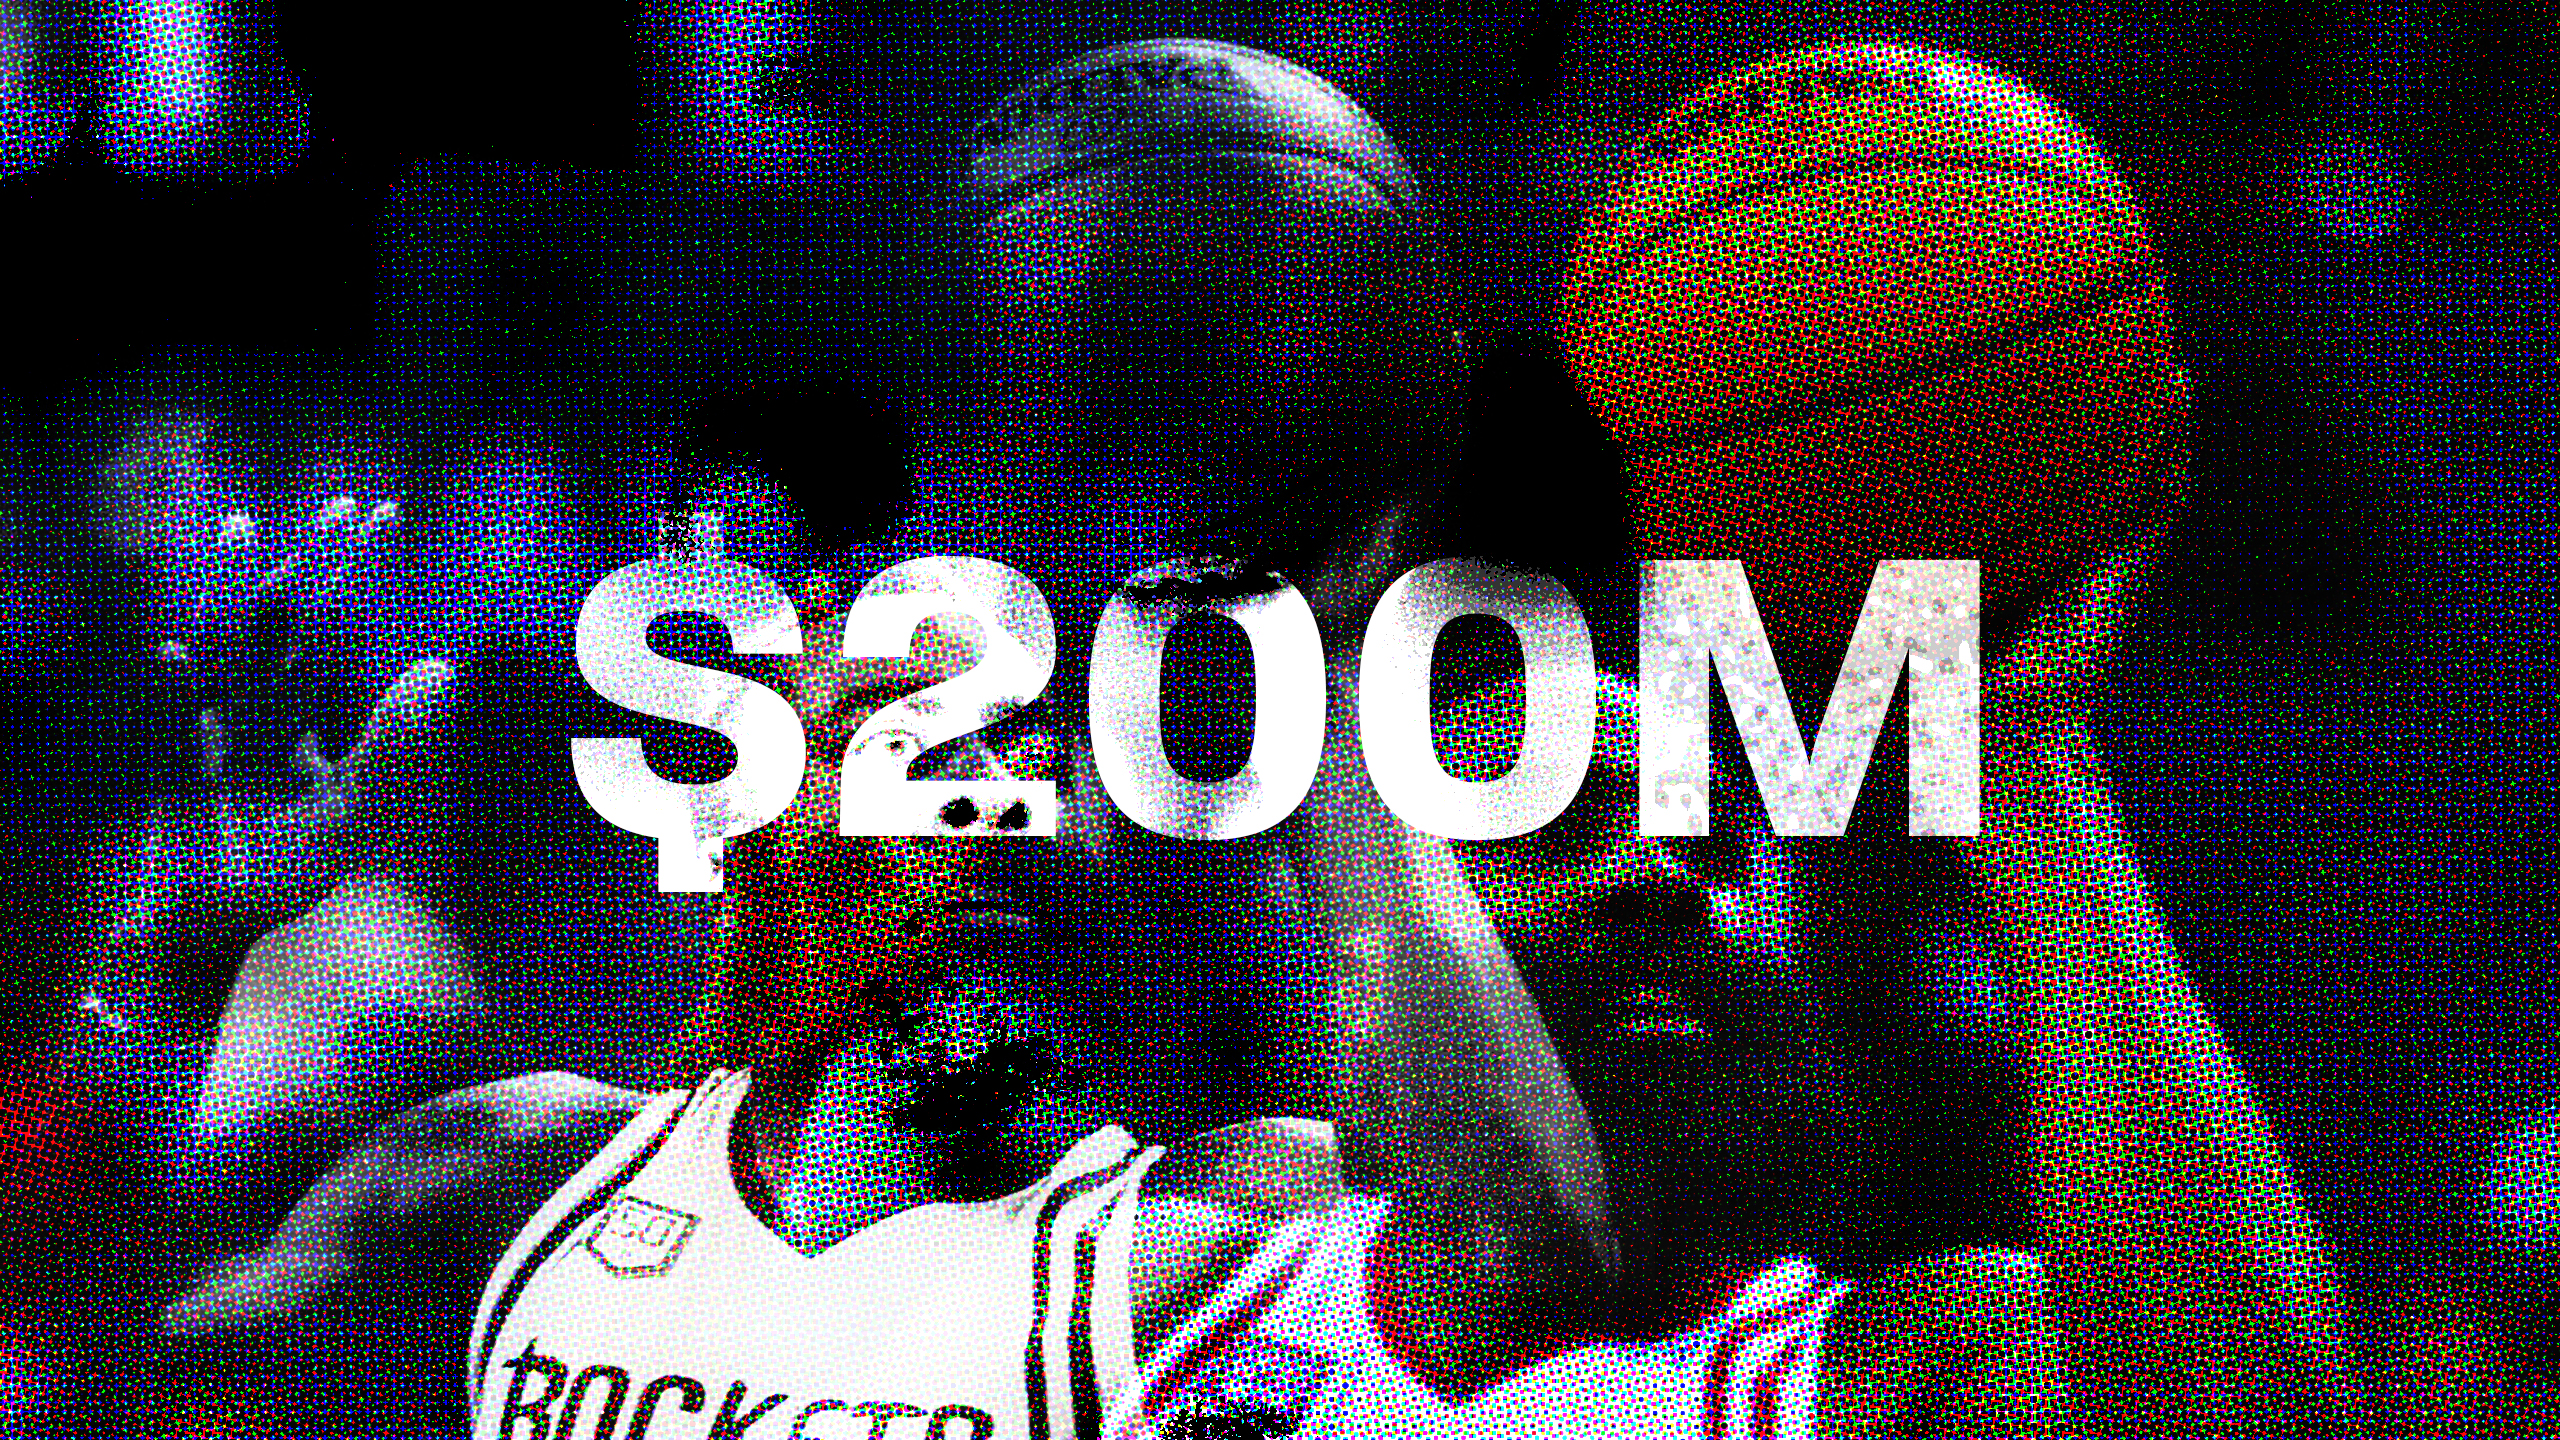 James Harden Could be Adidas's $200 Million Sneaker Man